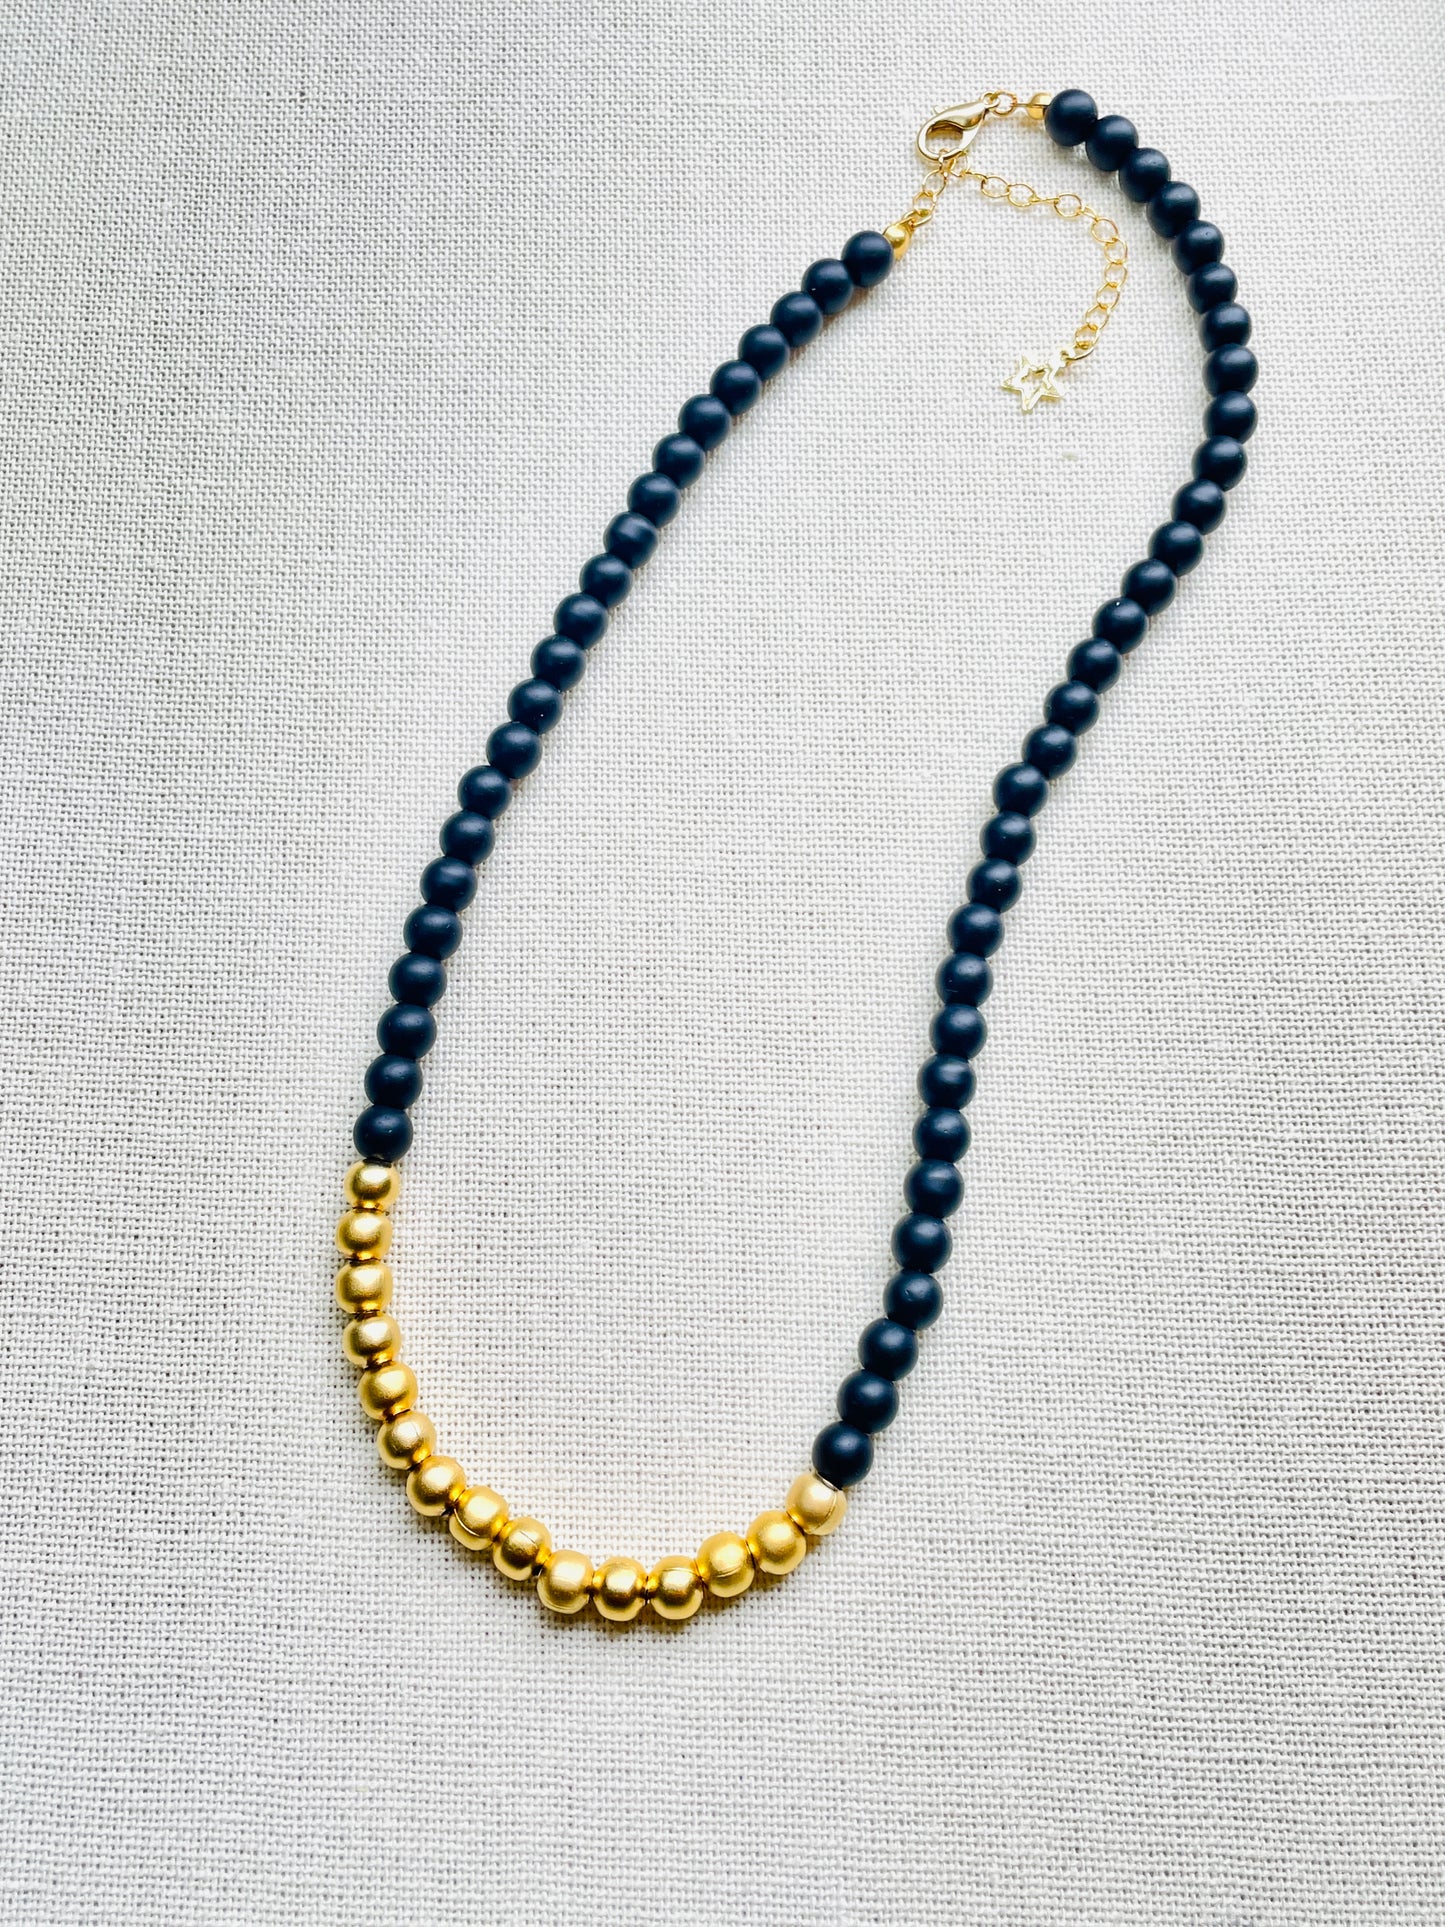 Gold and Black Beaded Necklace